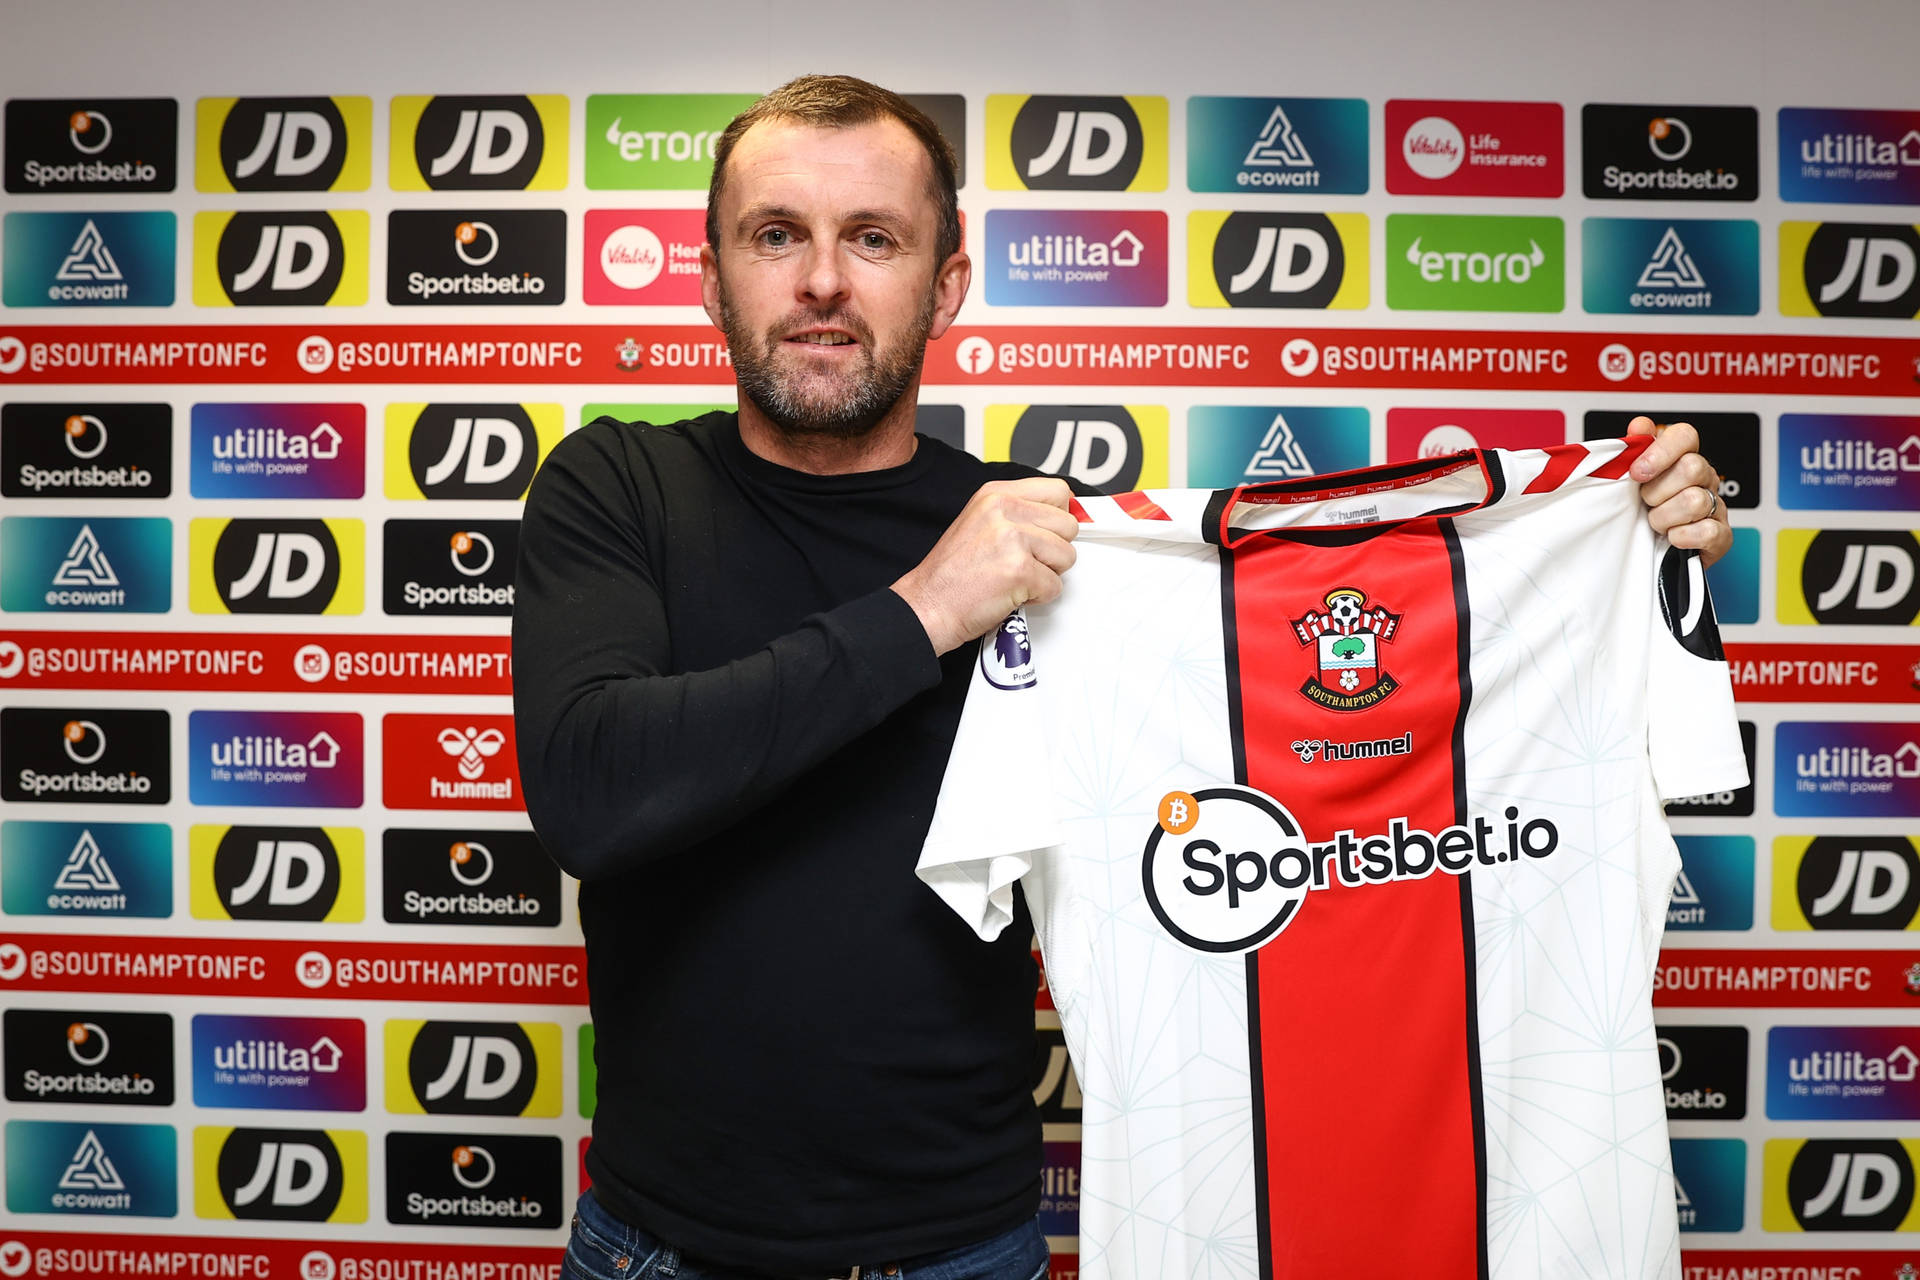 Nathanjones För Southampton Fc Would Be Translated To Nathan Jones För Southampton Fc. The Swedish Translation Would Remain The Same As There Aren't Any Specific Swedish Terms Used For Computer Or Mobile Wallpaper Or Football Club Names. Wallpaper